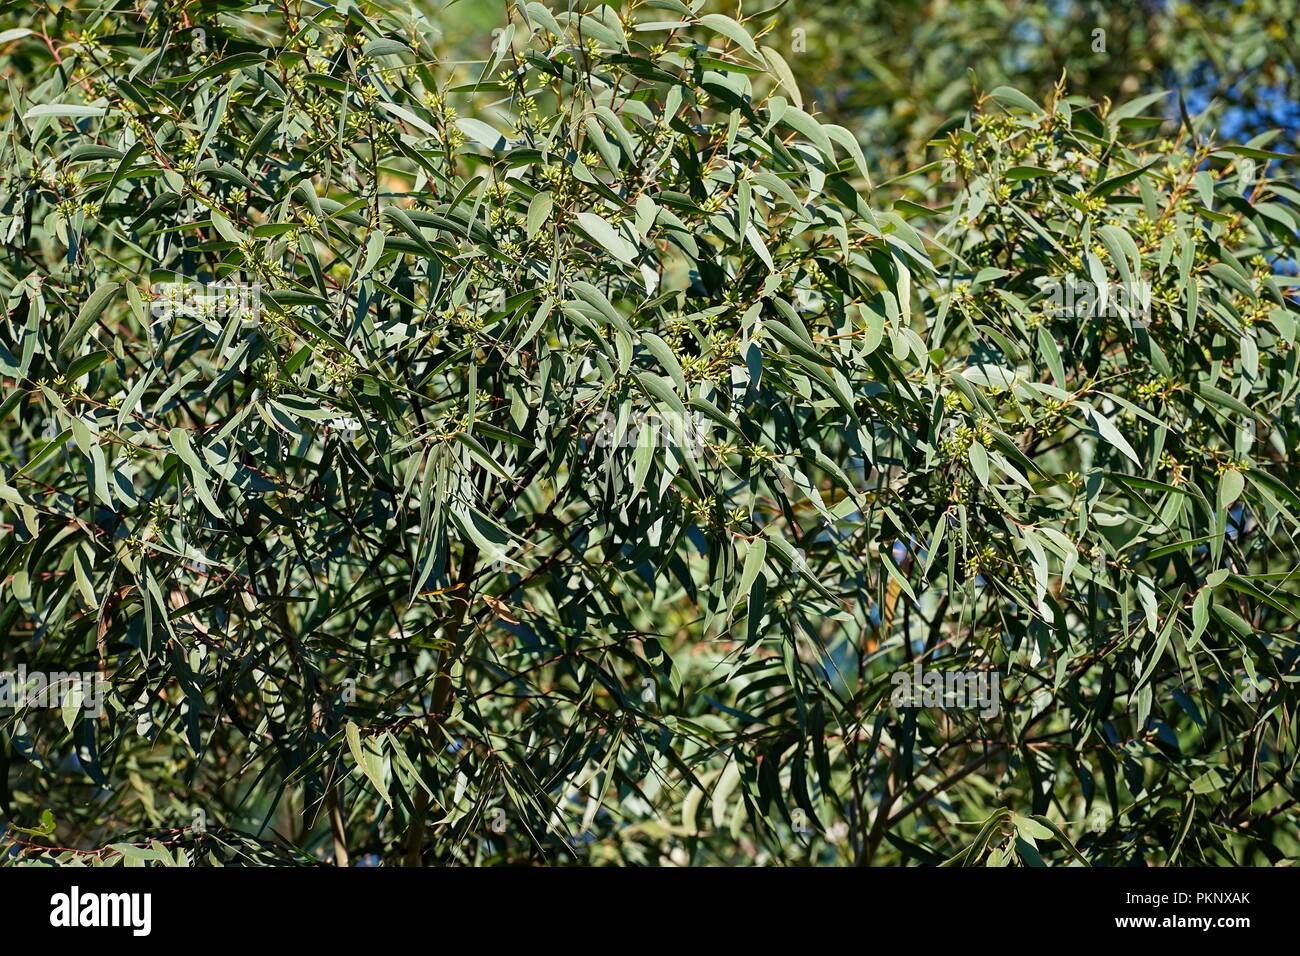 Leaves of a Eucalypt tree, a native Australian plant, on the branch in medium closeup. Stock Photo